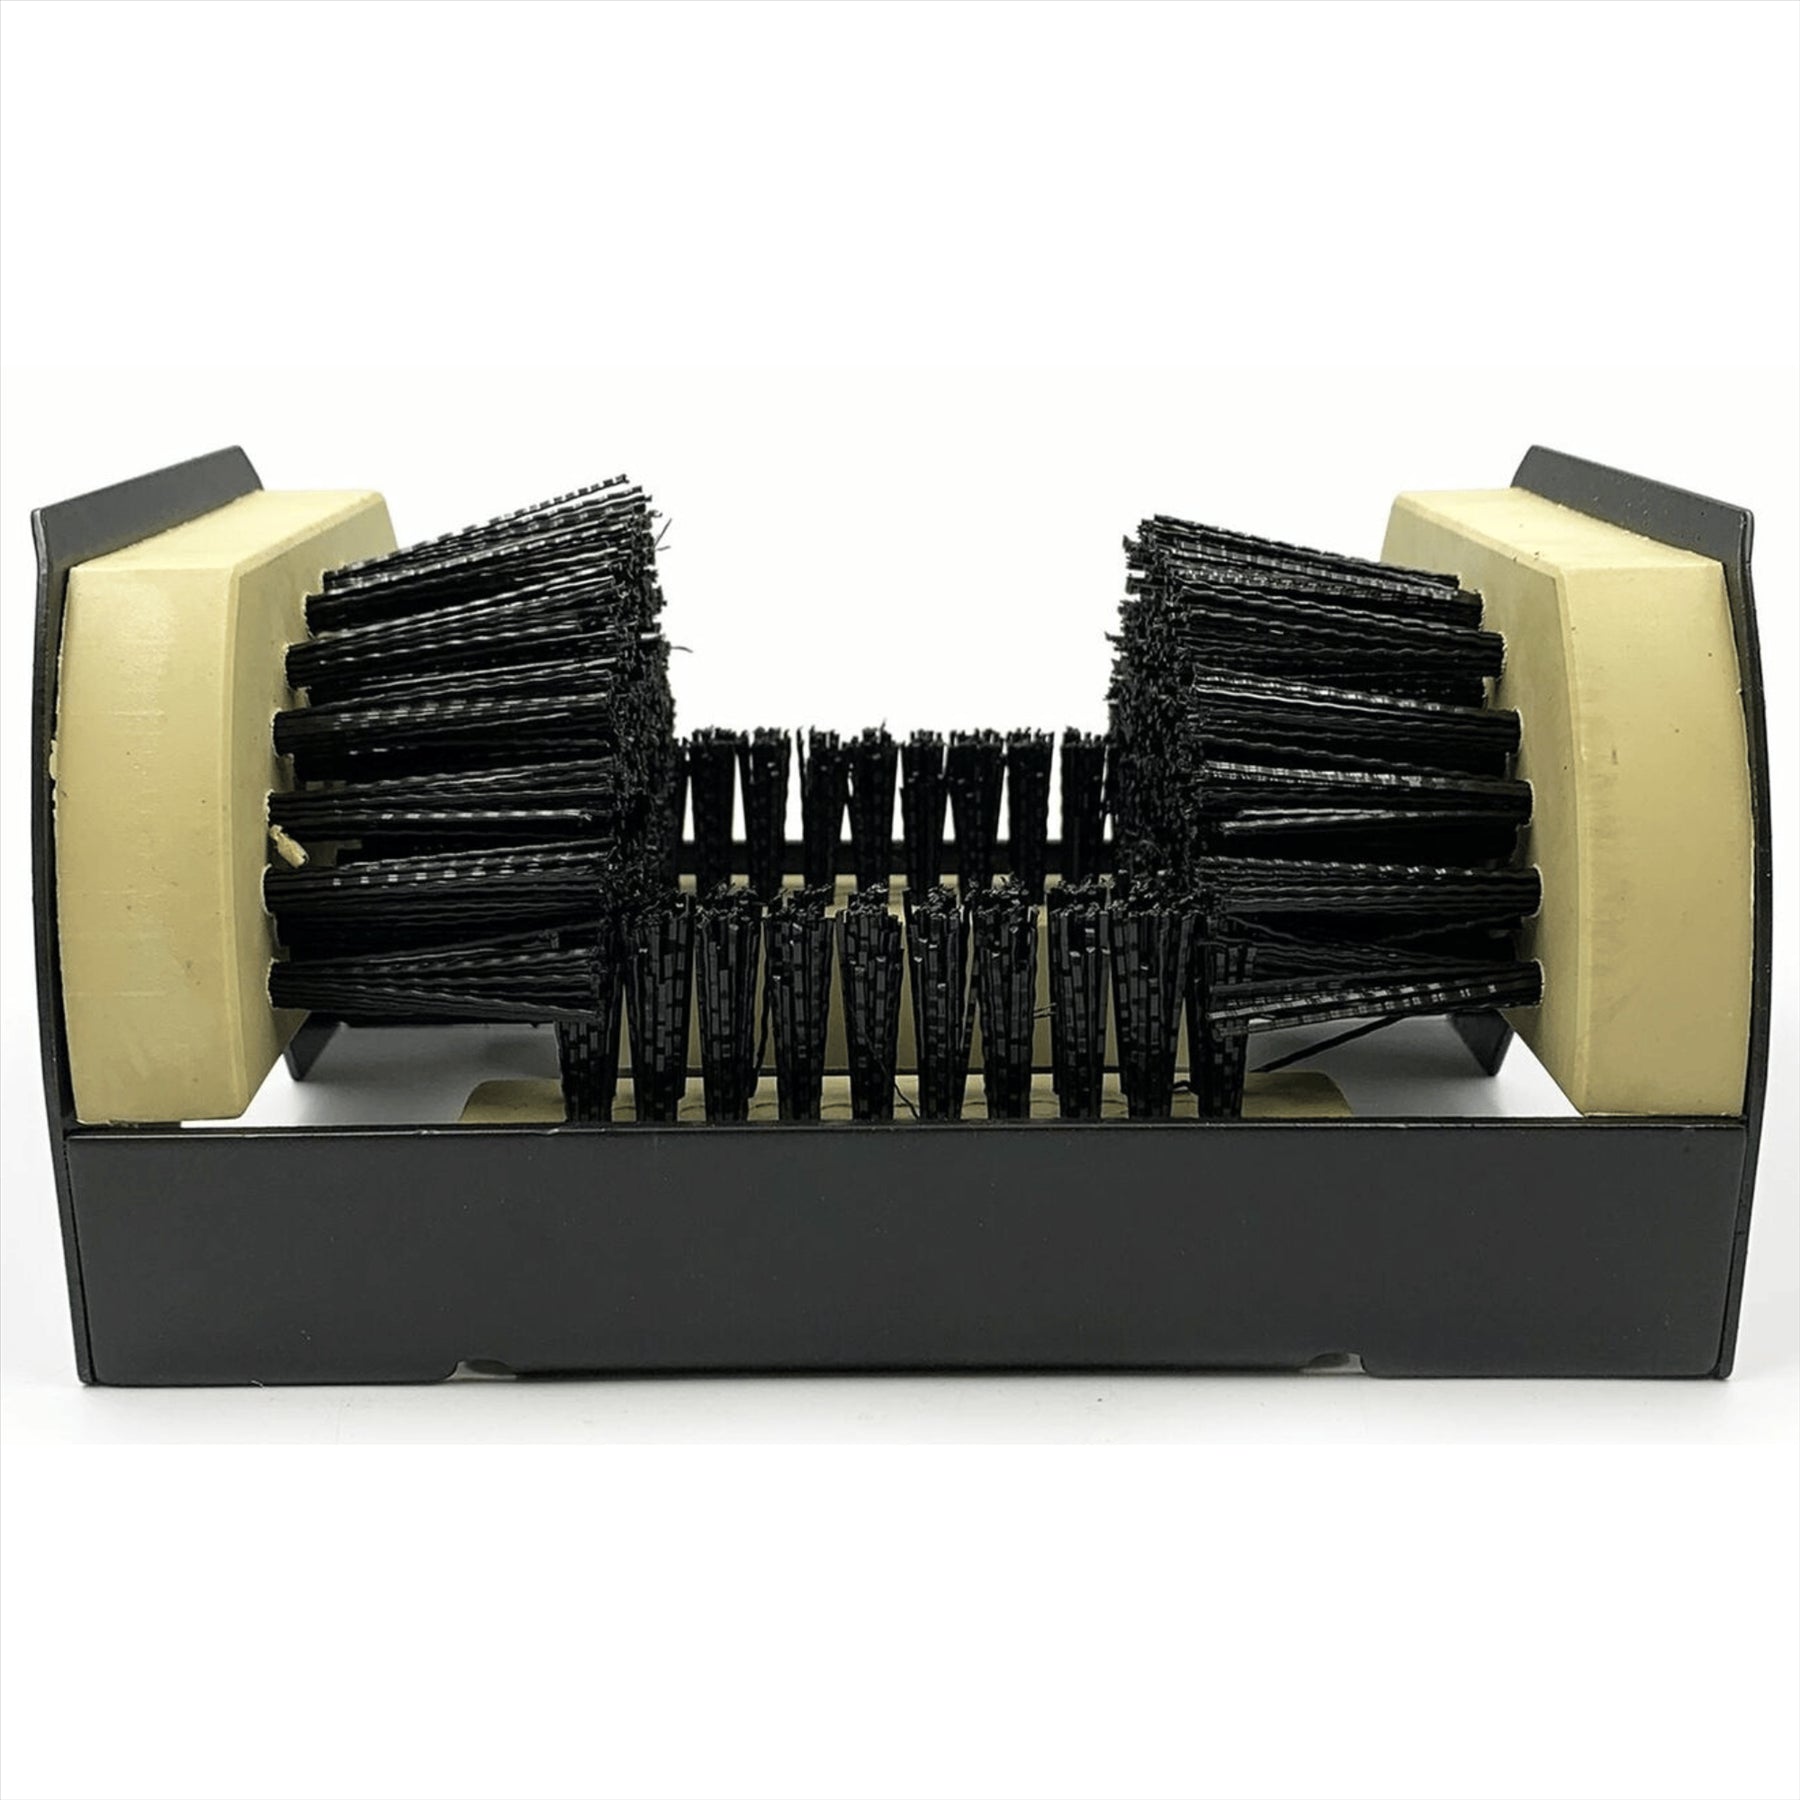 Heavy Duty Door Step Boot Scraper Brush Cleaner Mat - Removes Mud and Dirt from Shoes Walking Boots Wellys / Wellingtons etc